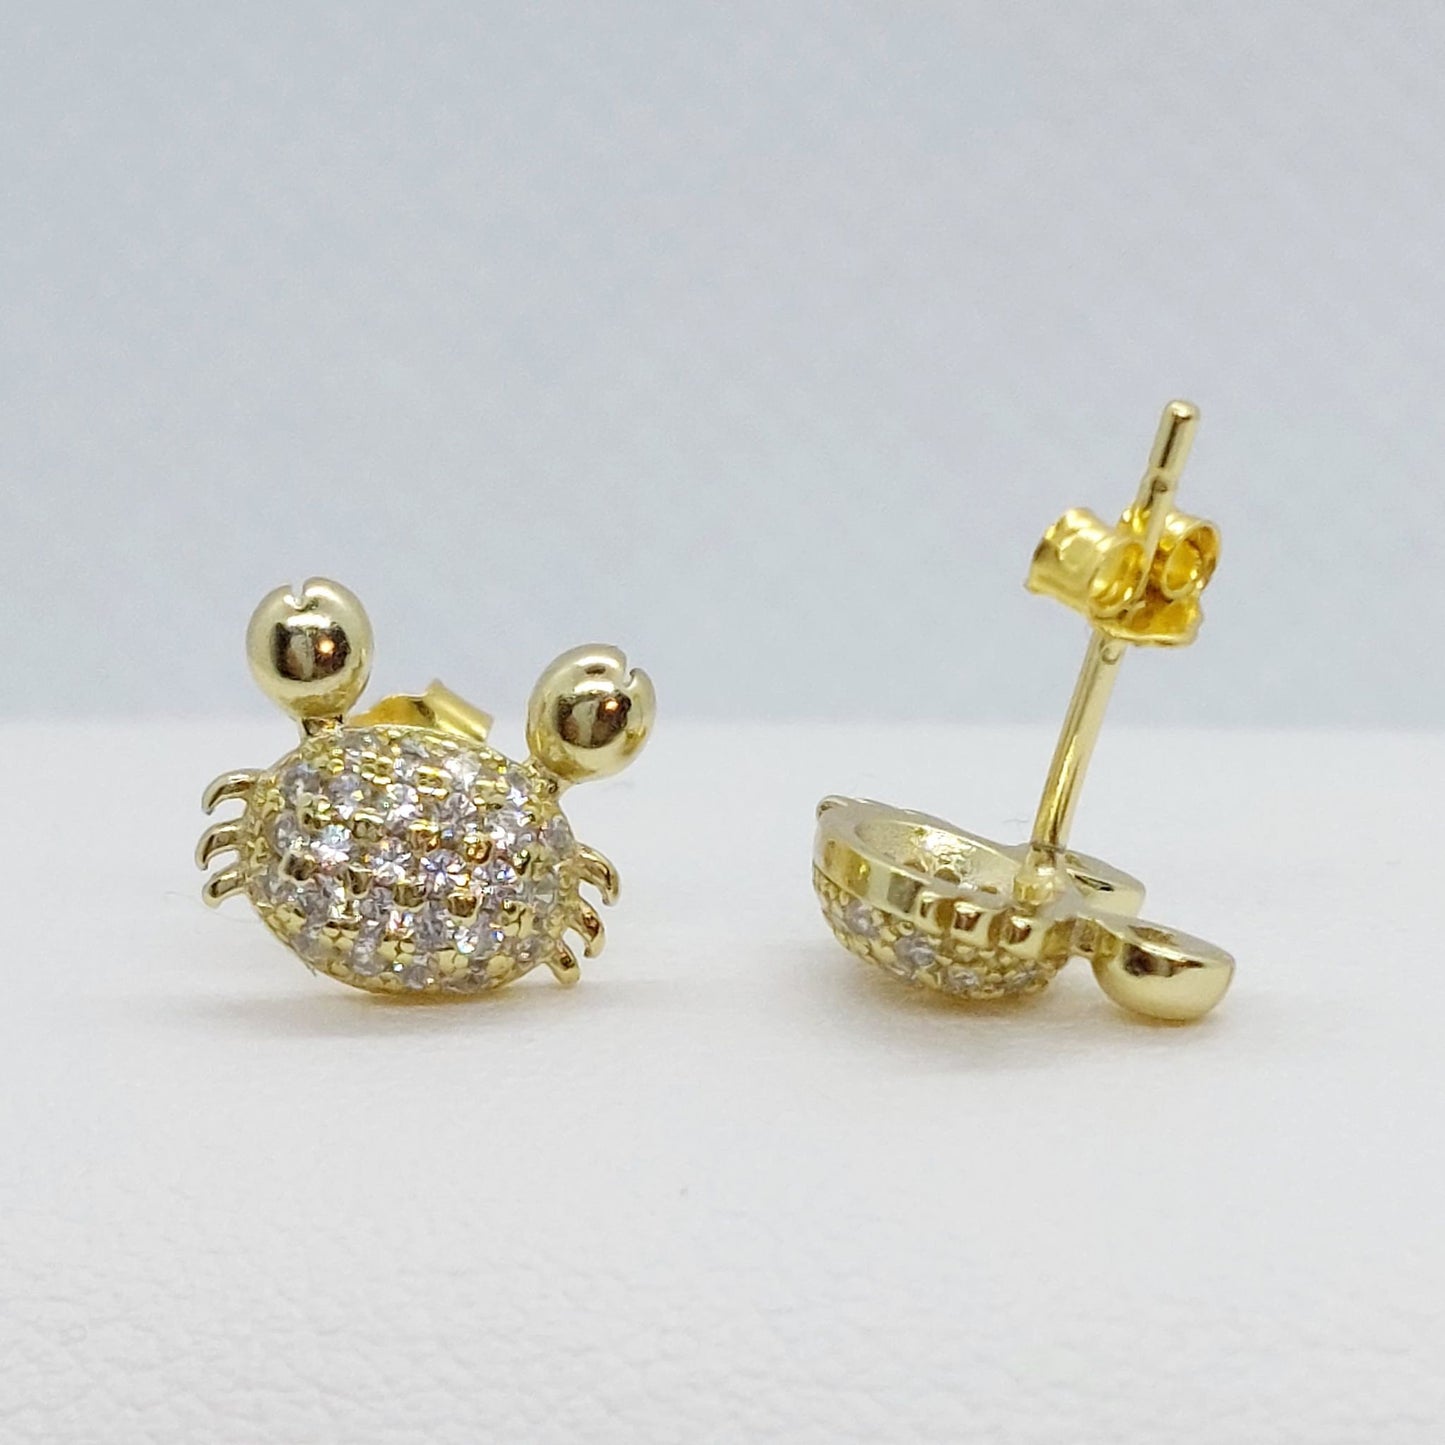 Crab with Zircon Stud Earrings - Sterling Silver Gold Plated